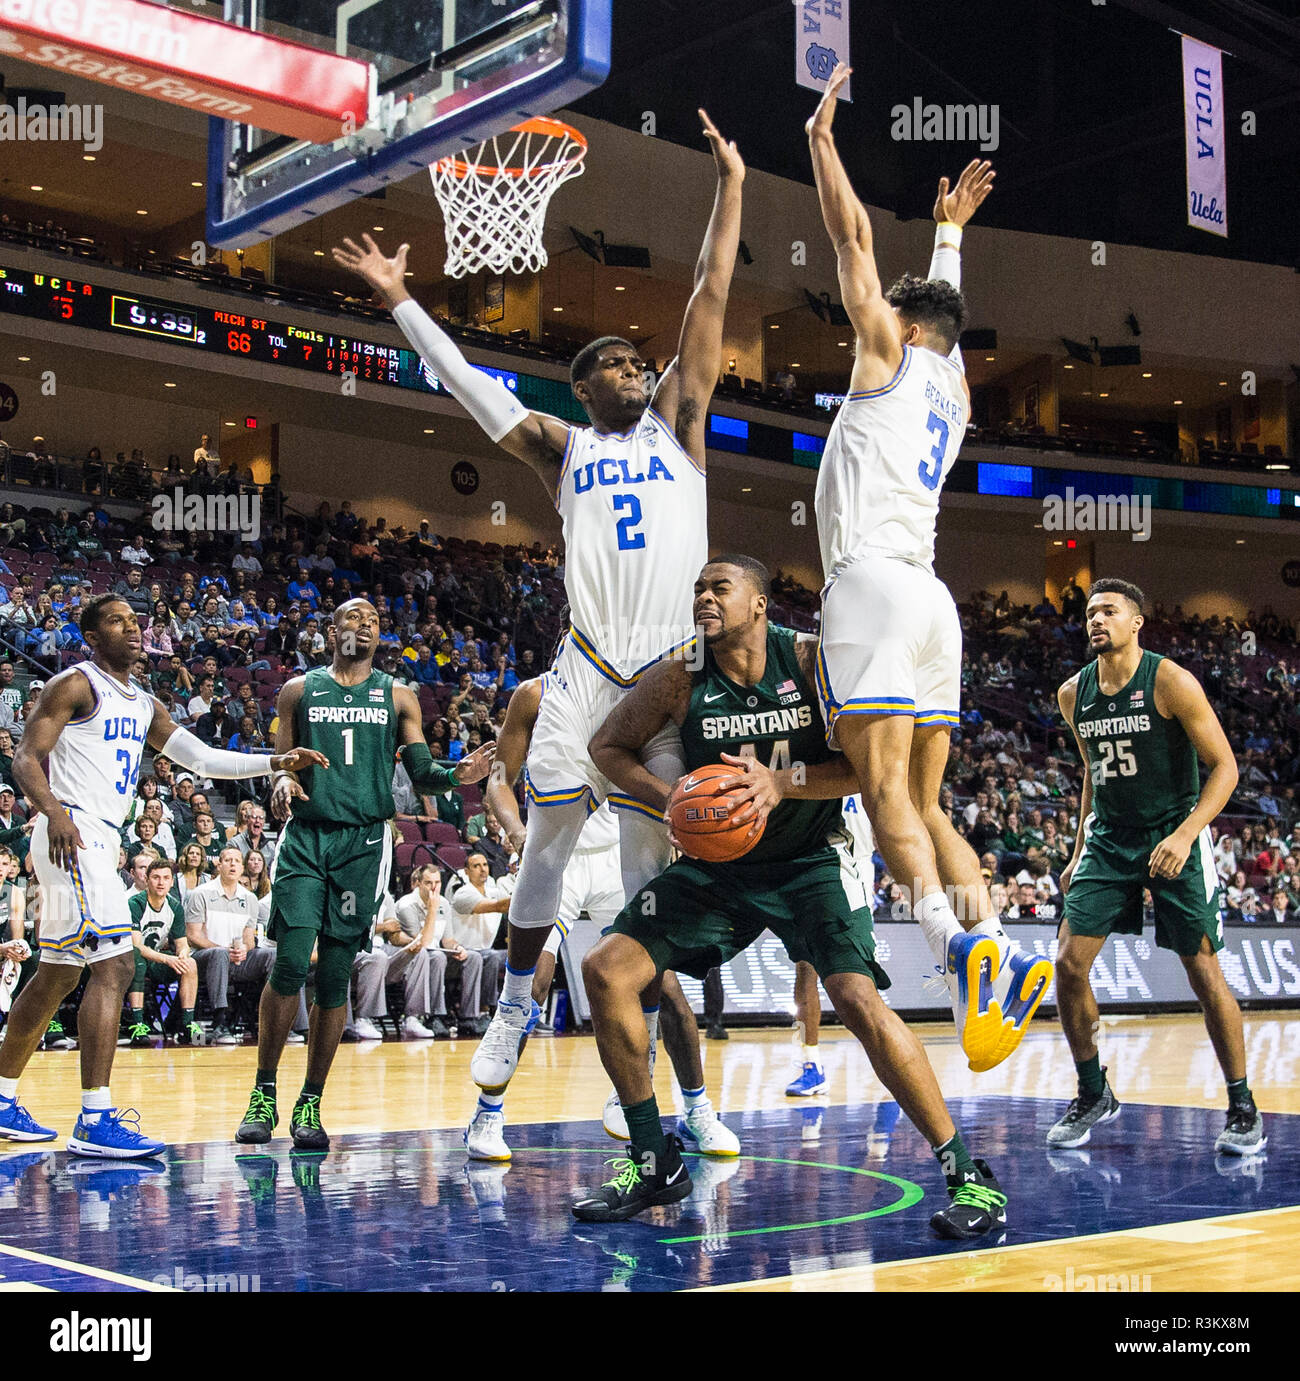 Nov 22 2018 Las Vegas, NV U.S.A. Michigan State forward Nick Ward (44) battles in the paint tries to score during the NCAA Men's Basketball Continental Tire Las Vegas Invitational between UCLA Bruins and the Michigan State Spartans 87-67 win at The Orleans Arena Las Vegas, NV. Thurman James / CSM Stock Photo